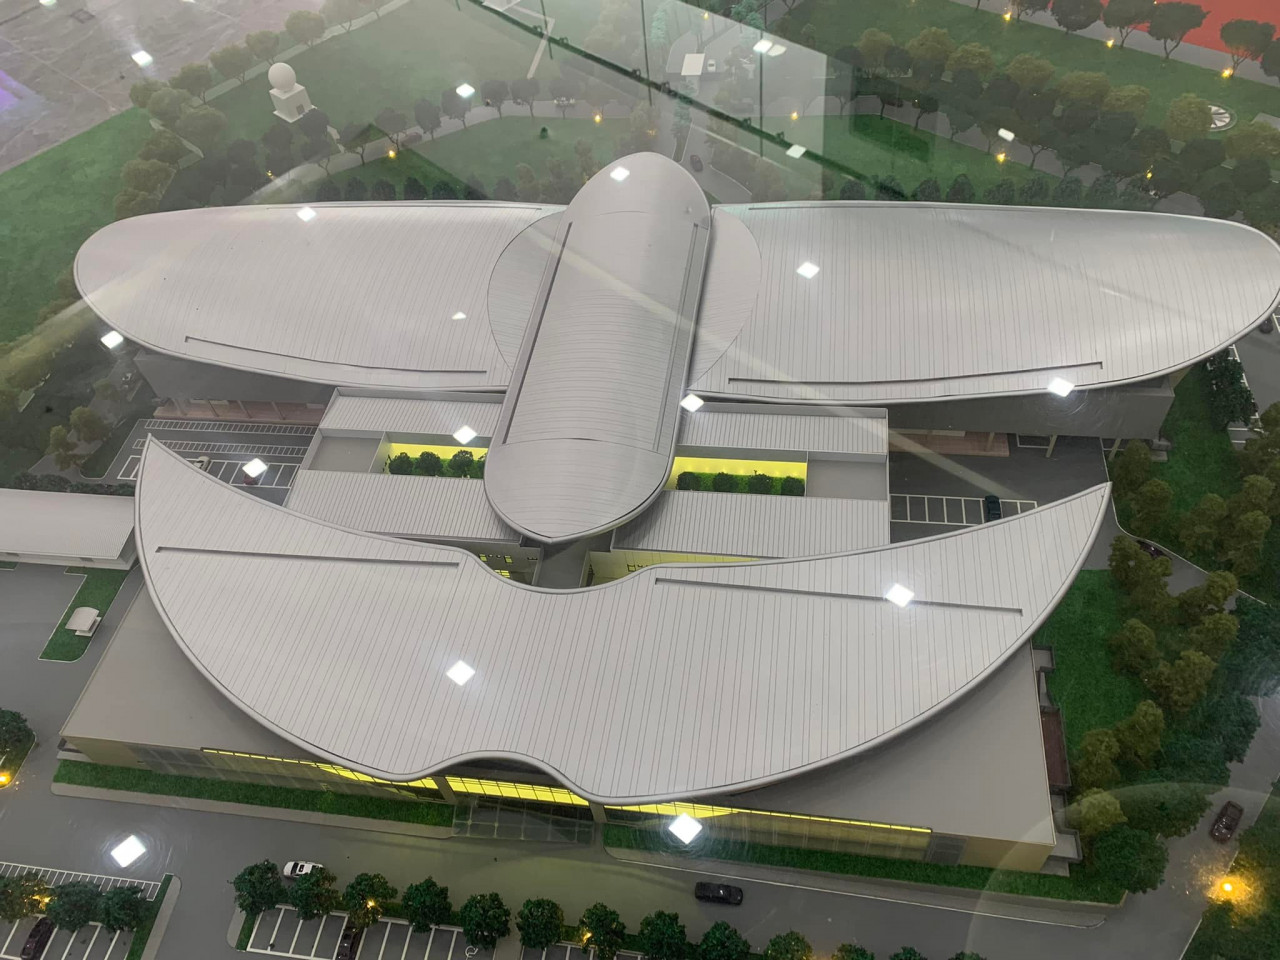 Pictured here is a scale model of the New KL ATCC building. The Auditor-General’s Report states that weaknesses in the physical security aspects of the building and access to the system have exposed its operations to the risk of intrusion, modifications and data loss. – Pena Celoreng Facebook pic, August 7, 2022